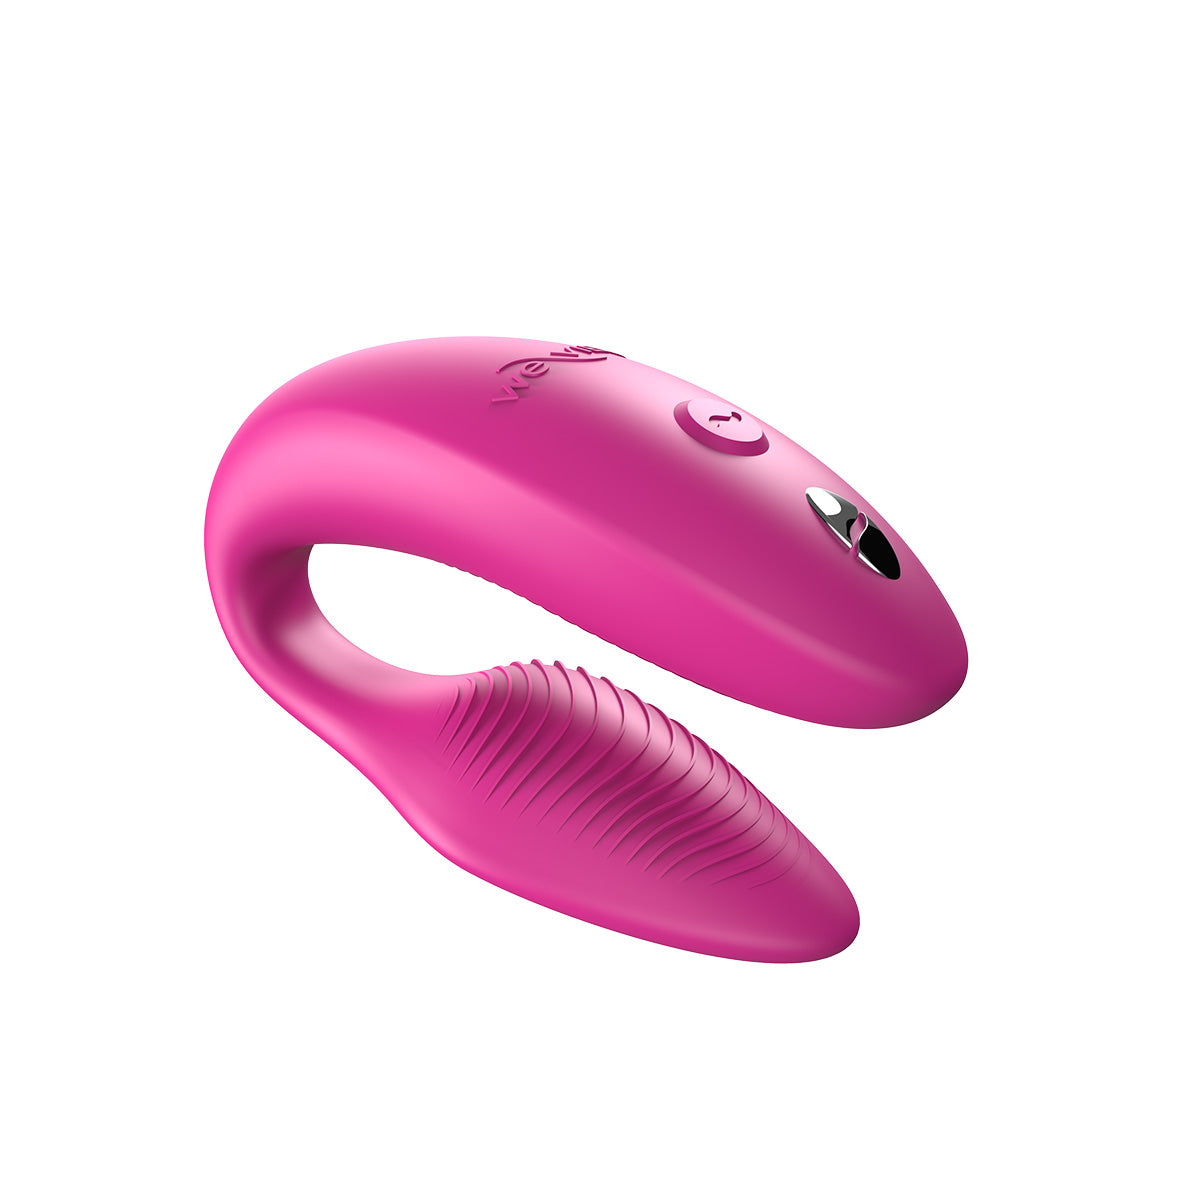 We-Vibe® - Sync Wearable Couples’ Vibrator 2nd  Generation - Rose